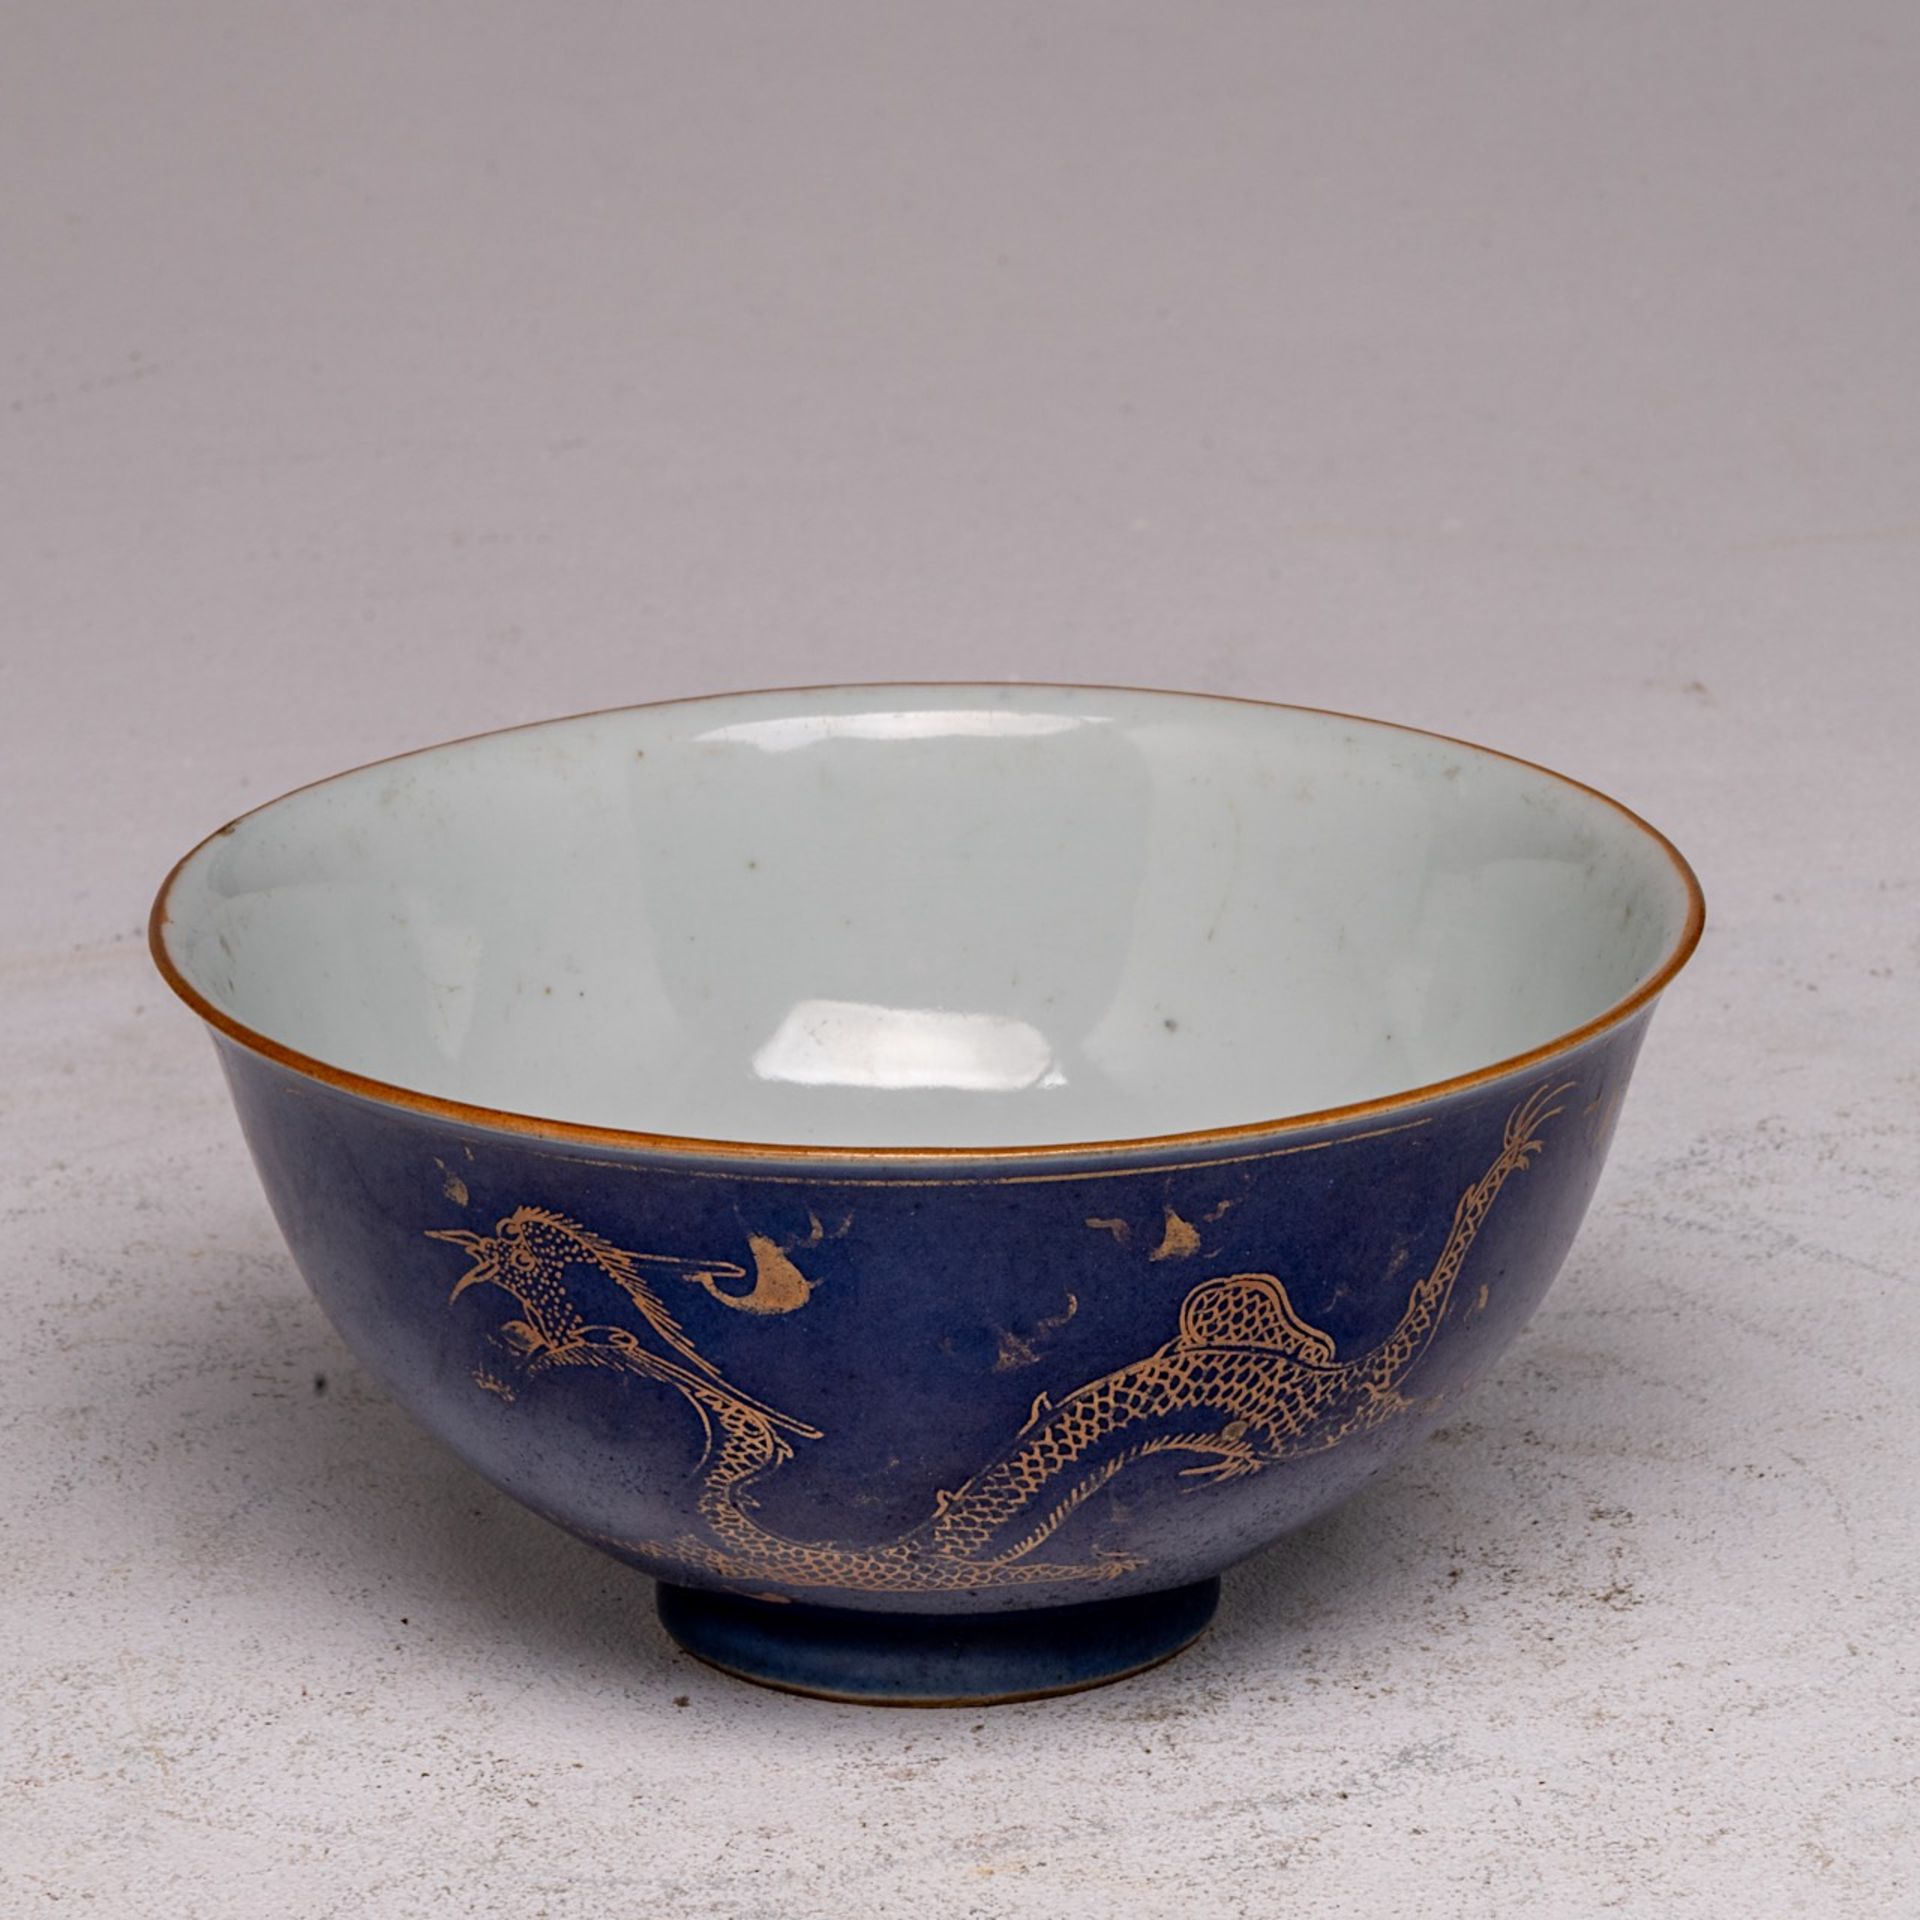 A Chinese gilt on blue ground 'Dragon' bowl, with a Qianlong mark and of the period, H 7 - dia 14,2 - Bild 8 aus 8